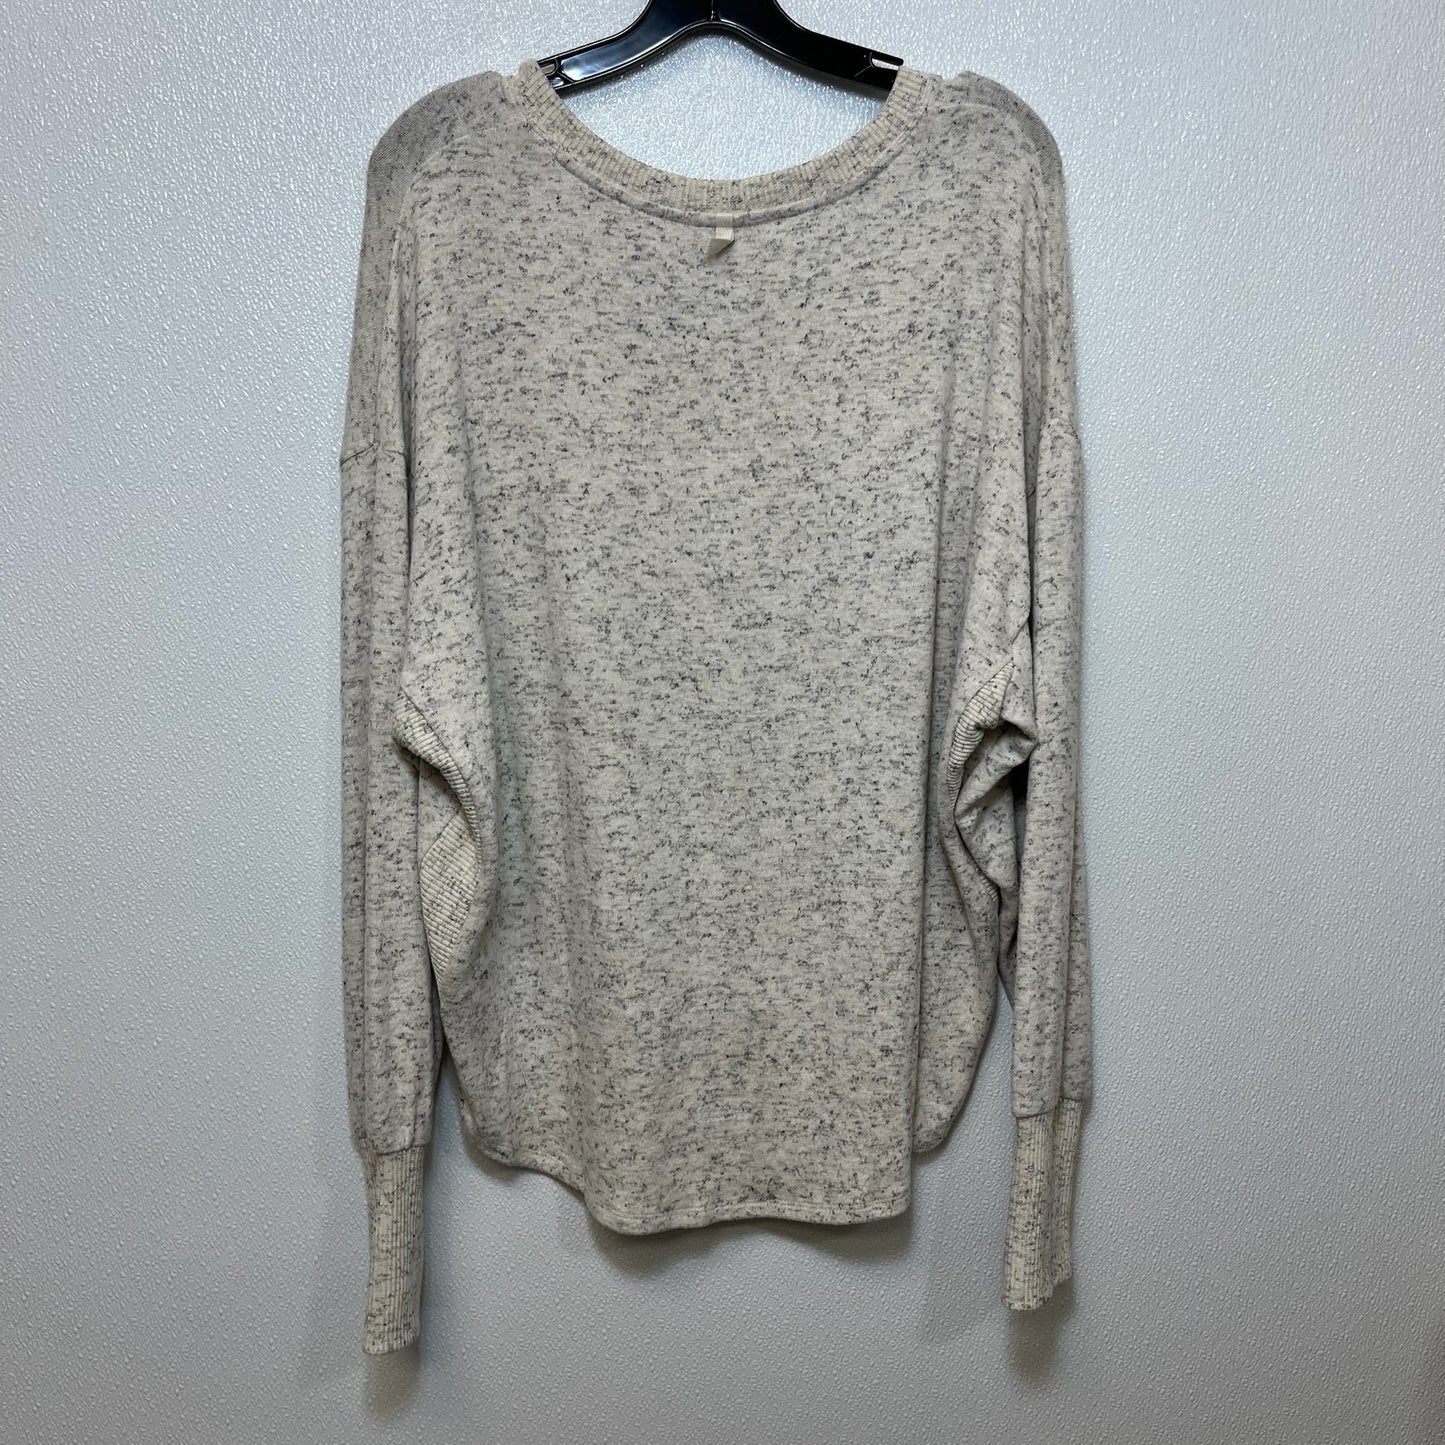 Sweater By Saturday/sunday  Size: M